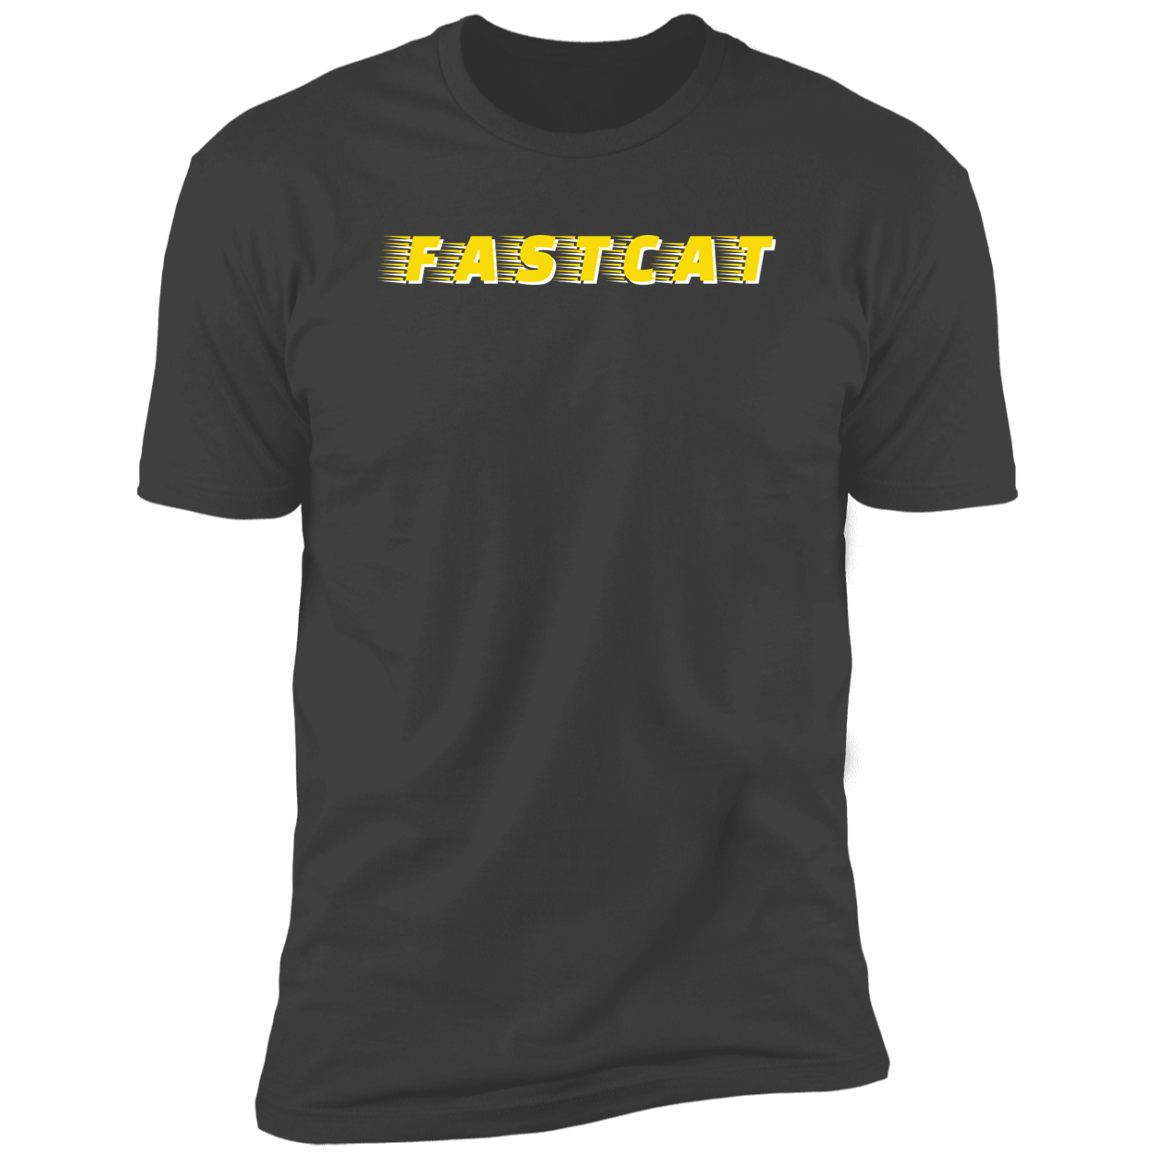 FastCAT Dog T-shirt, sporting dog t-shirt for humans, FastCAT t-shirt, in heavy metal gray